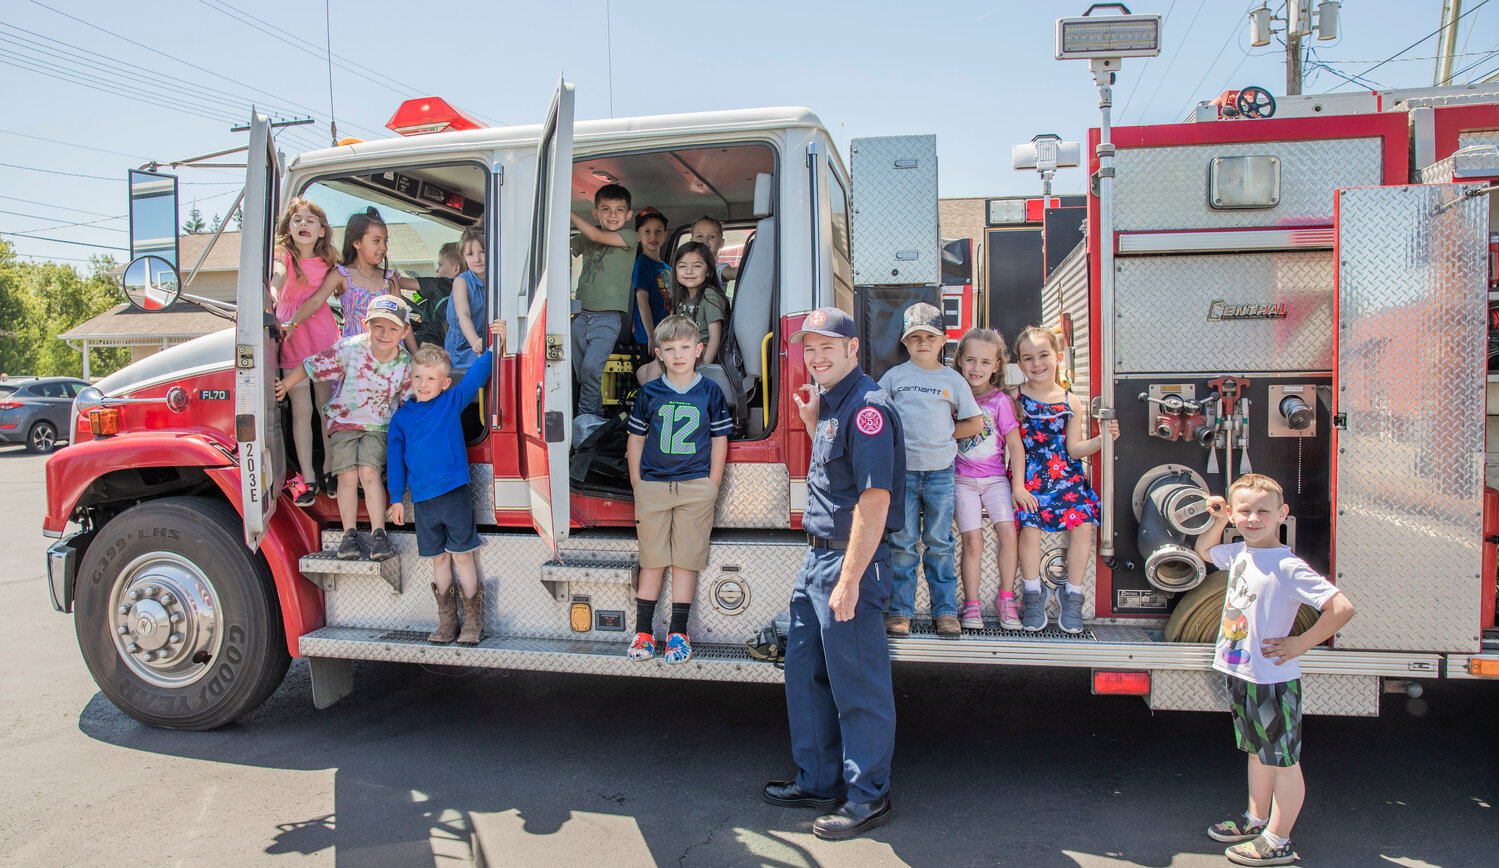 Kindergarten students pose for a photo while climbing in and around a fire engine during a visit to Lewis County Fire District 5 in Napavine on Tuesday, June 7.